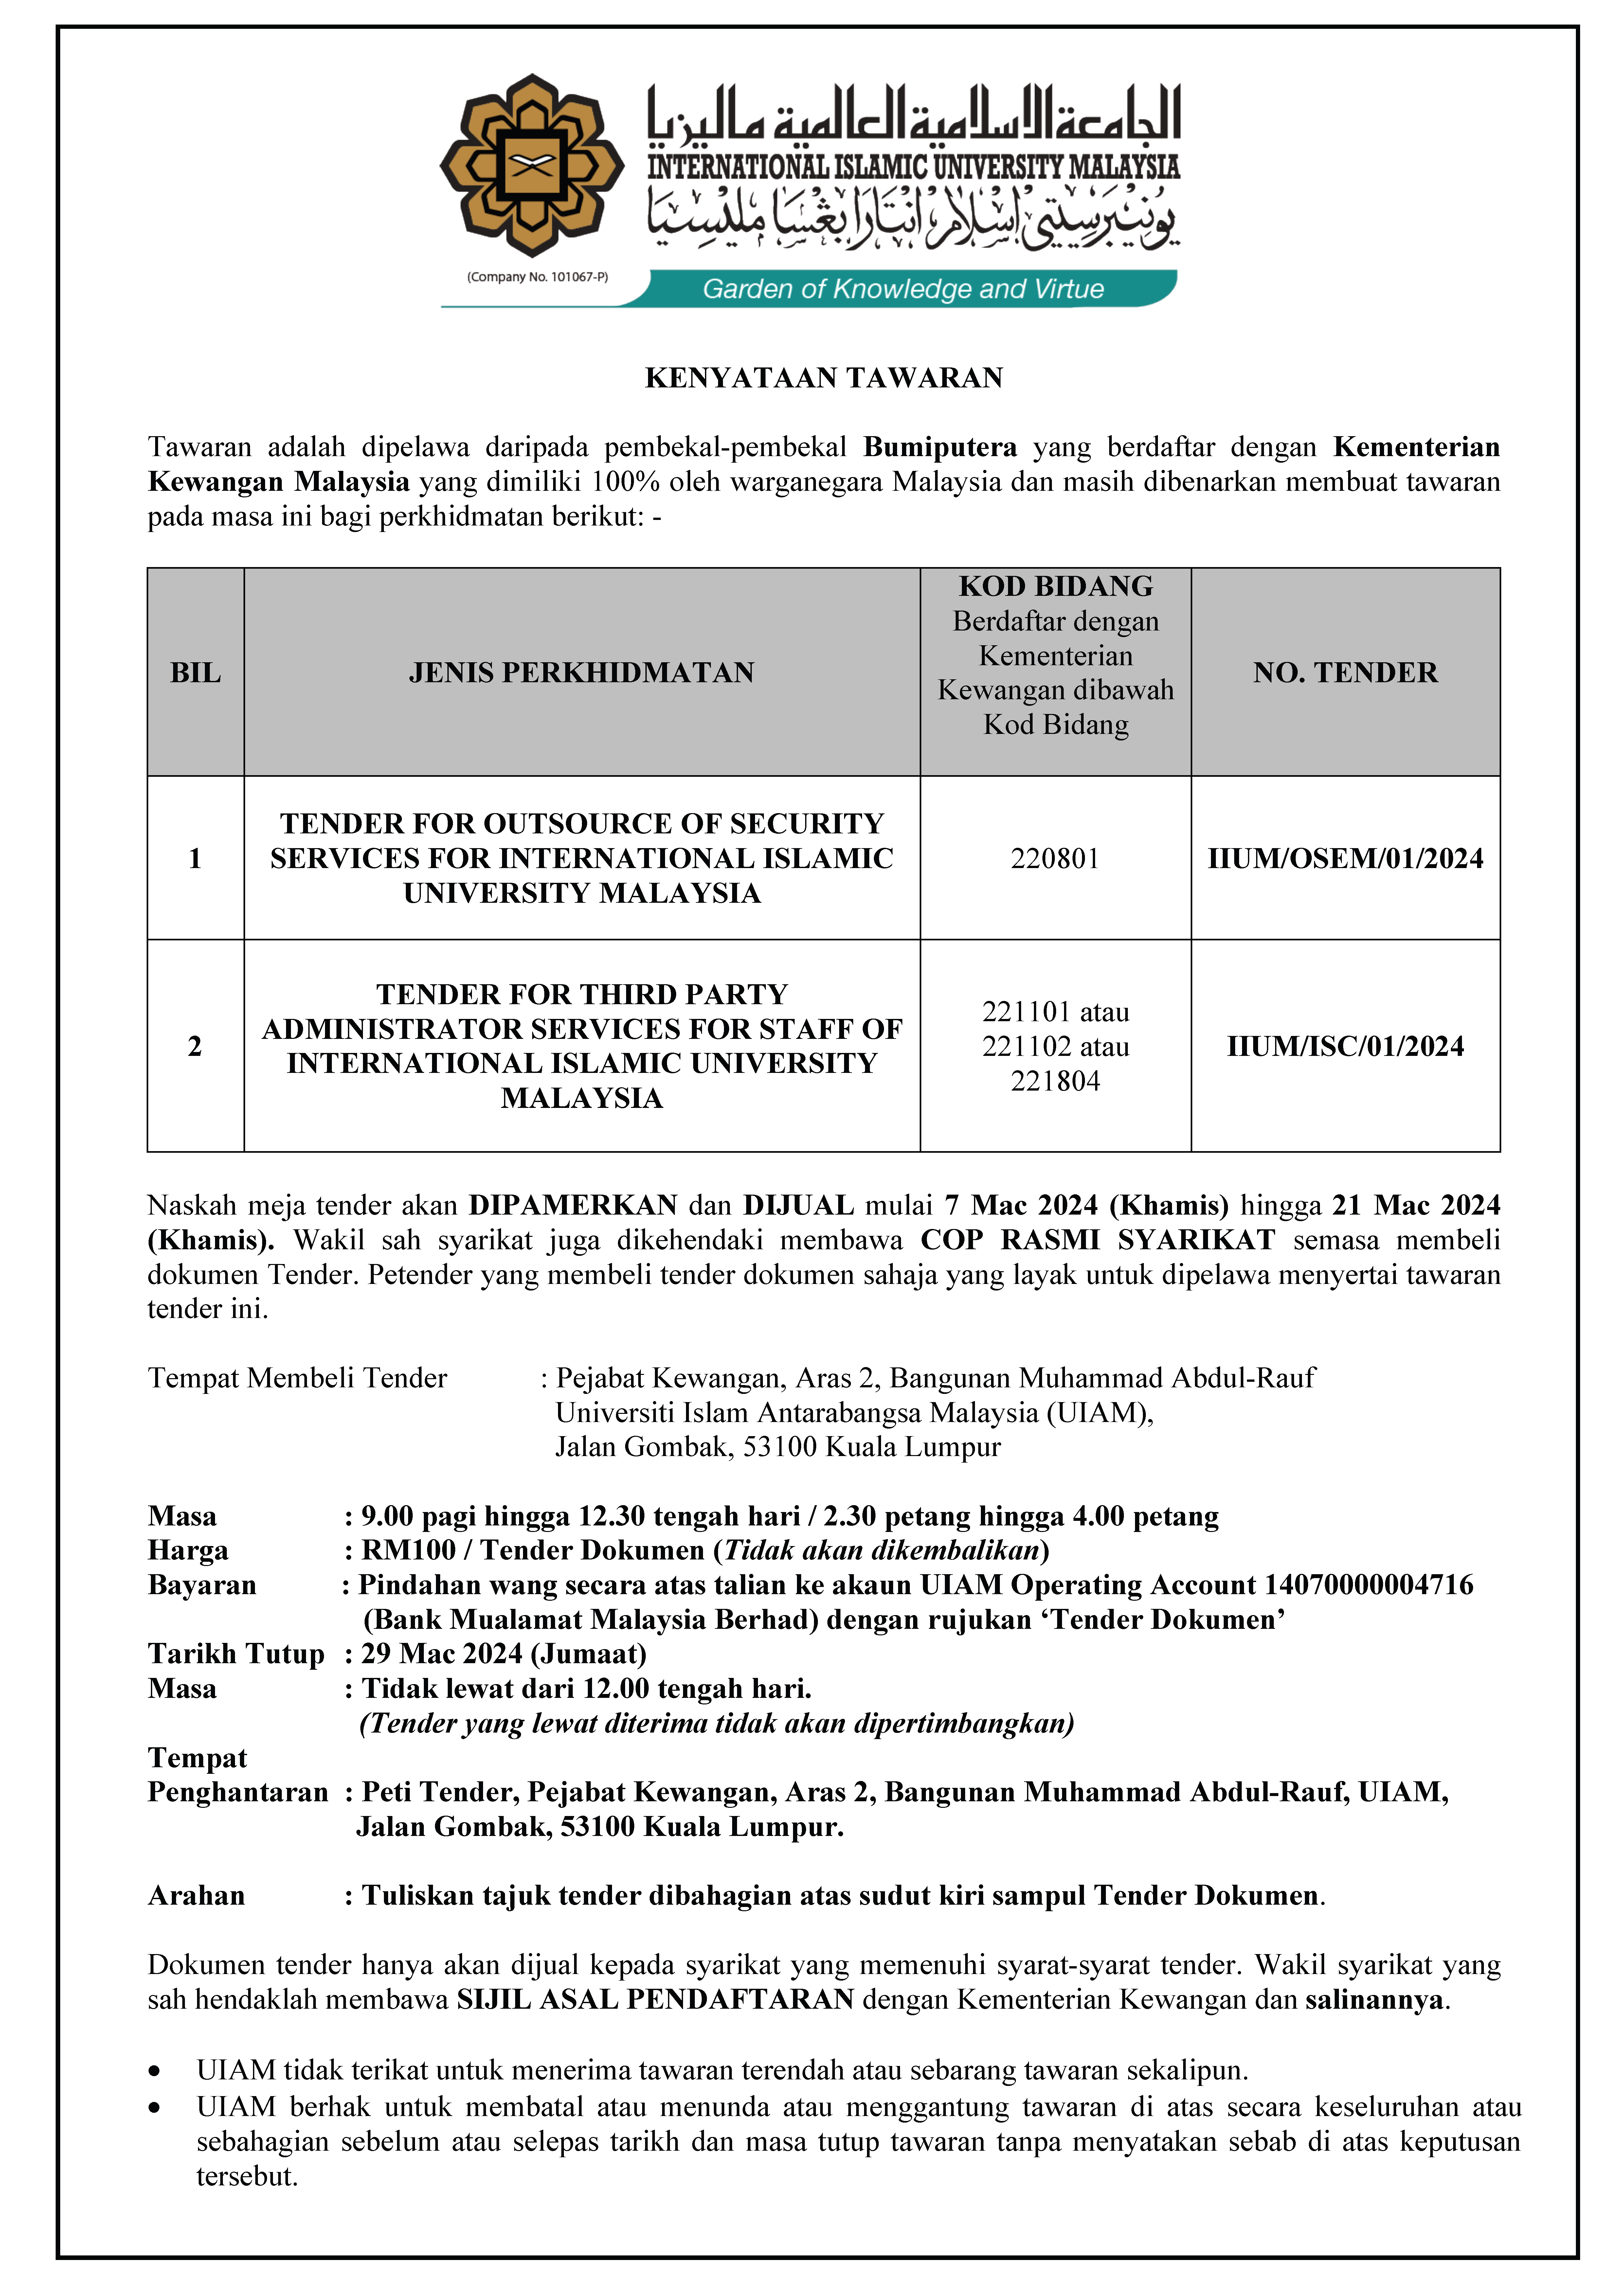 “TENDER FOR OUTSOURCE OF SECURITY SERVICES FOR INTERNATIONAL ISLAMIC UNIVERSITY MALAYSIA” AND “TENDER FOR THIRD PARTY ADMINISTRATOR SERVICES FOR STAFF OF INTERNATIONAL ISLAMIC UNIVERSITY MALAYSIA”